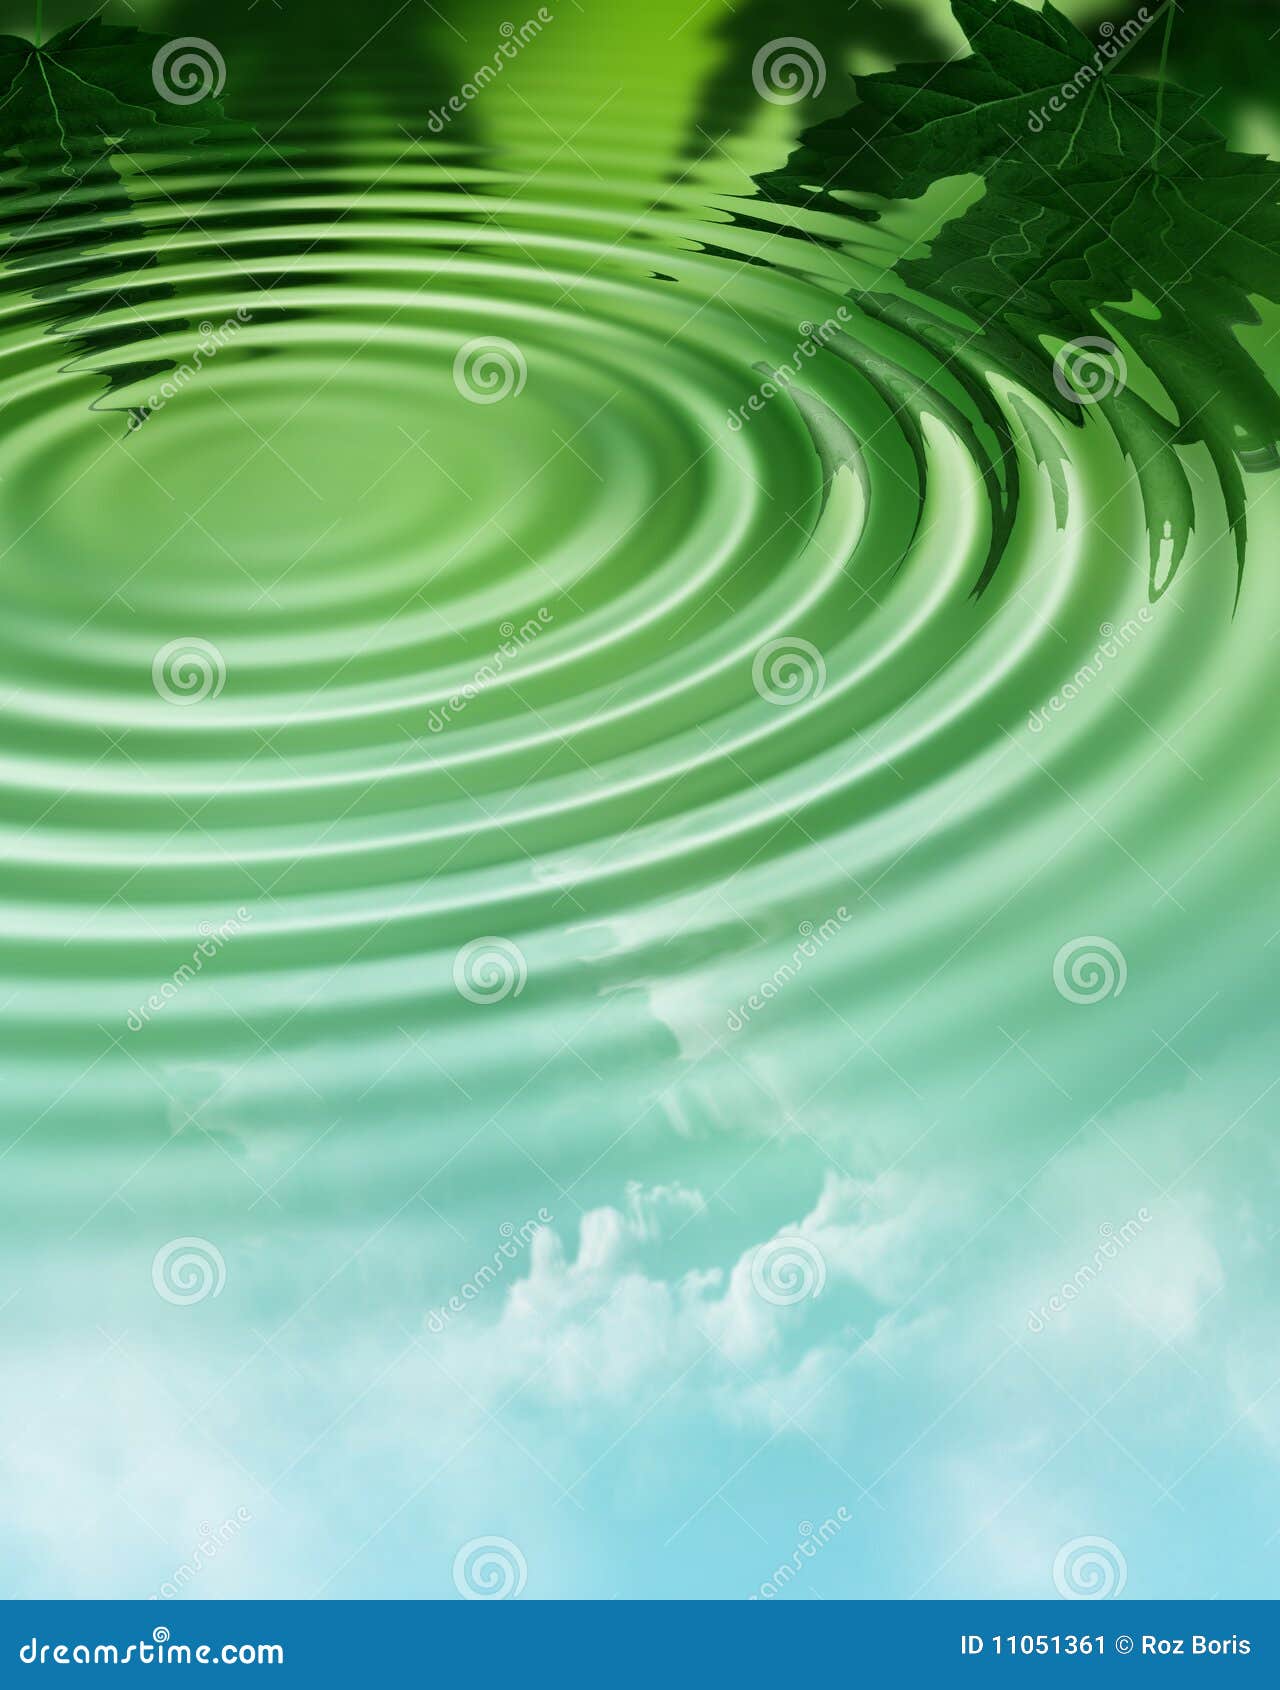 Water ripple in forest stock image. Image of lush, forest - 11051361